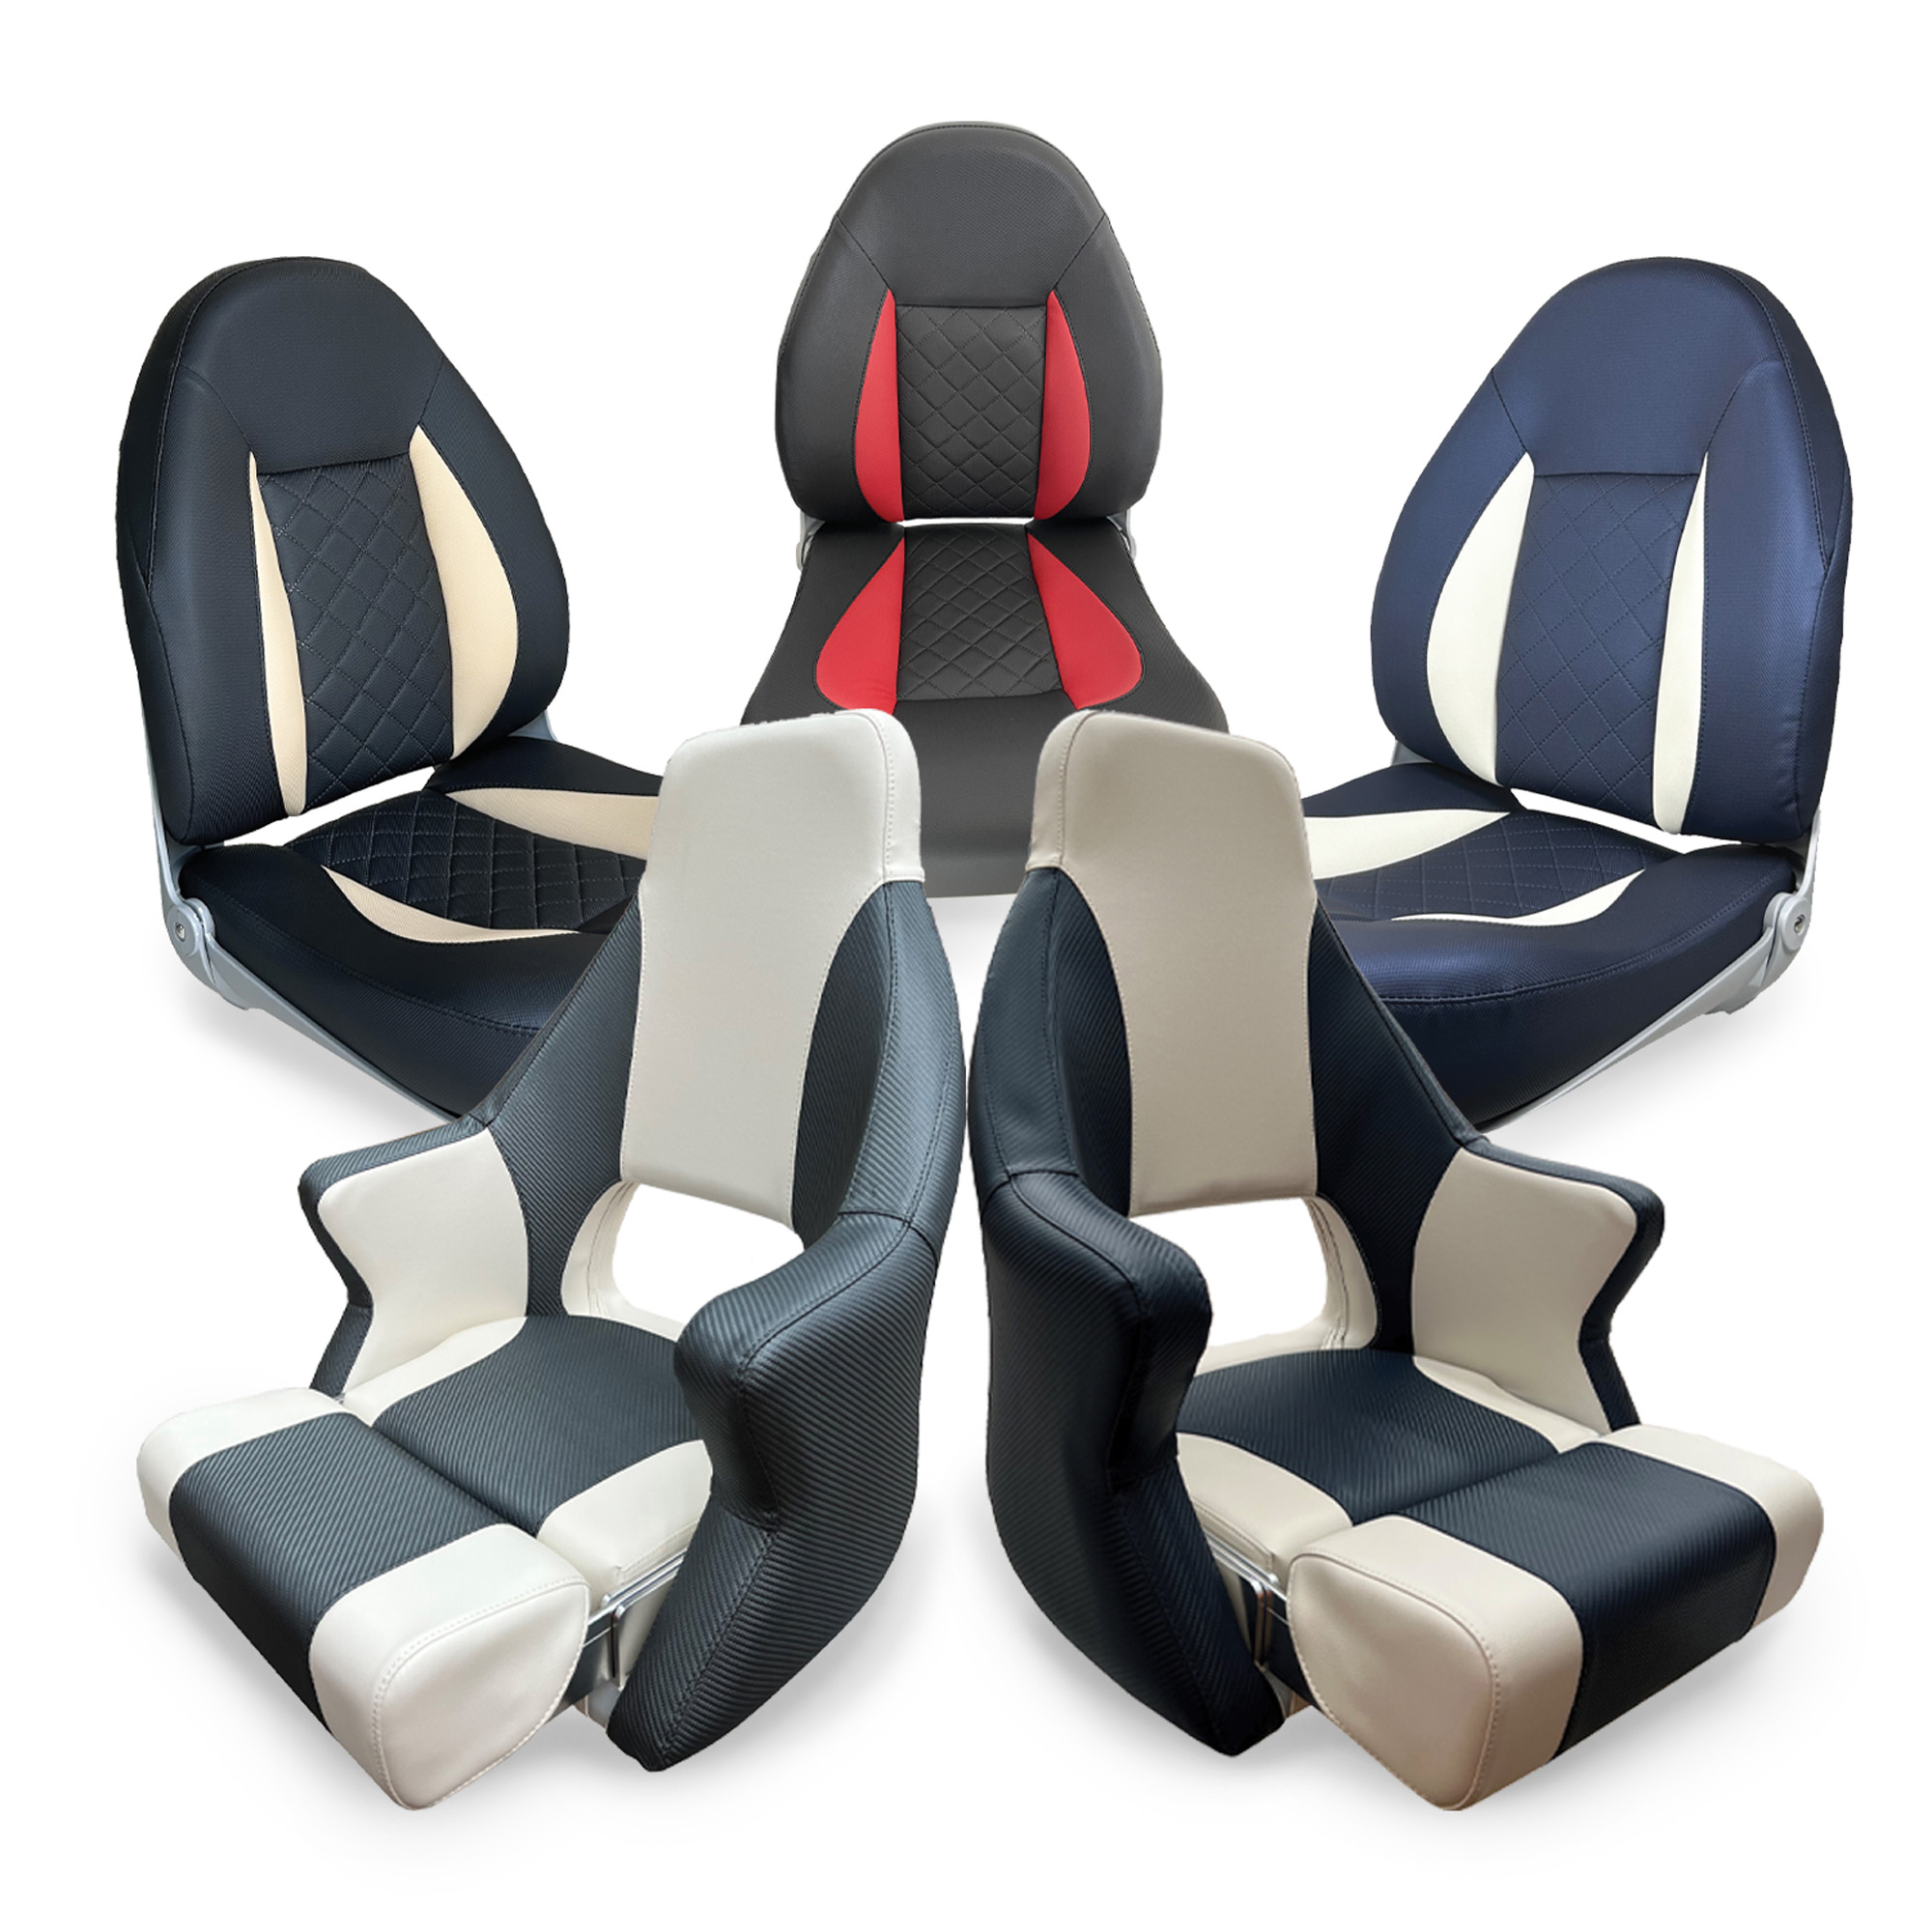 Product category - Boat Seats